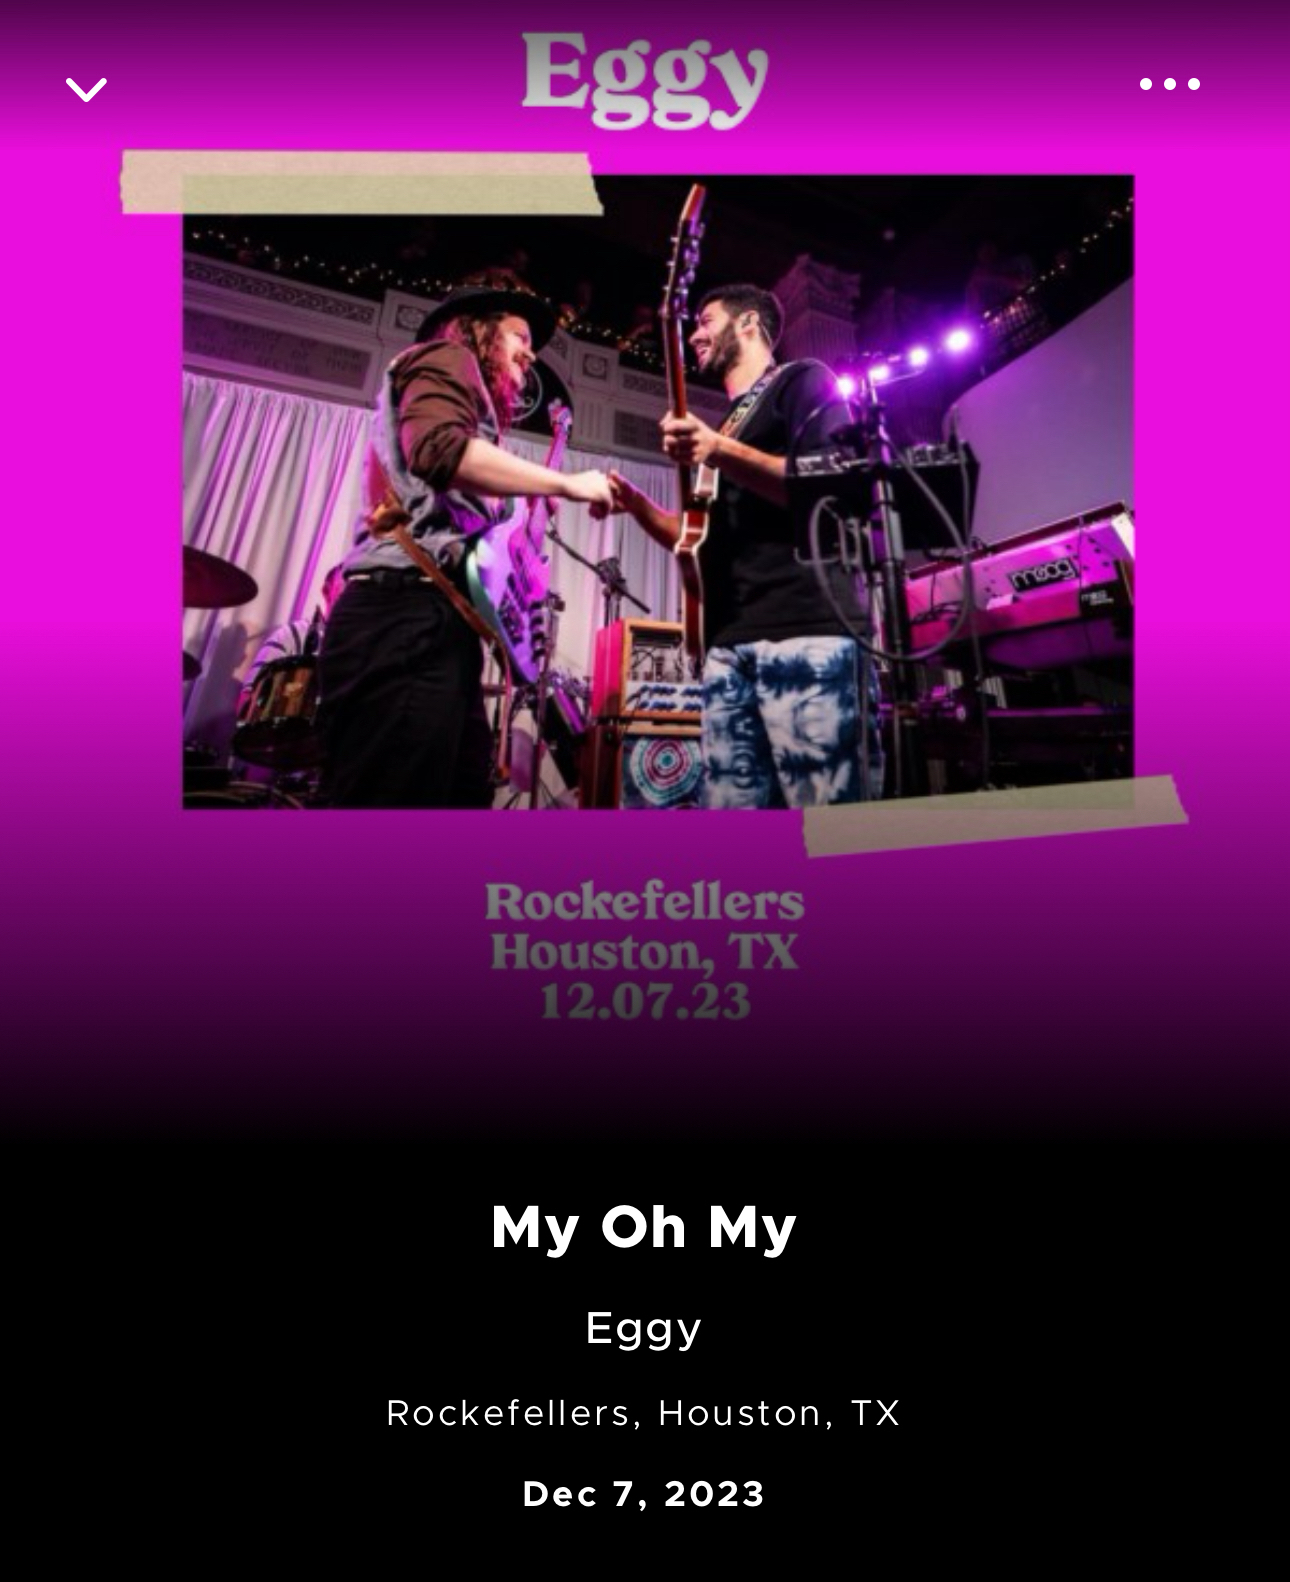 An image of two musicians from the band Eggy performing on stage at Rockefellers, Houston, TX on December 7, 2023. The background features purple lighting and part of a drum set. The musicians are playing guitars and facing each